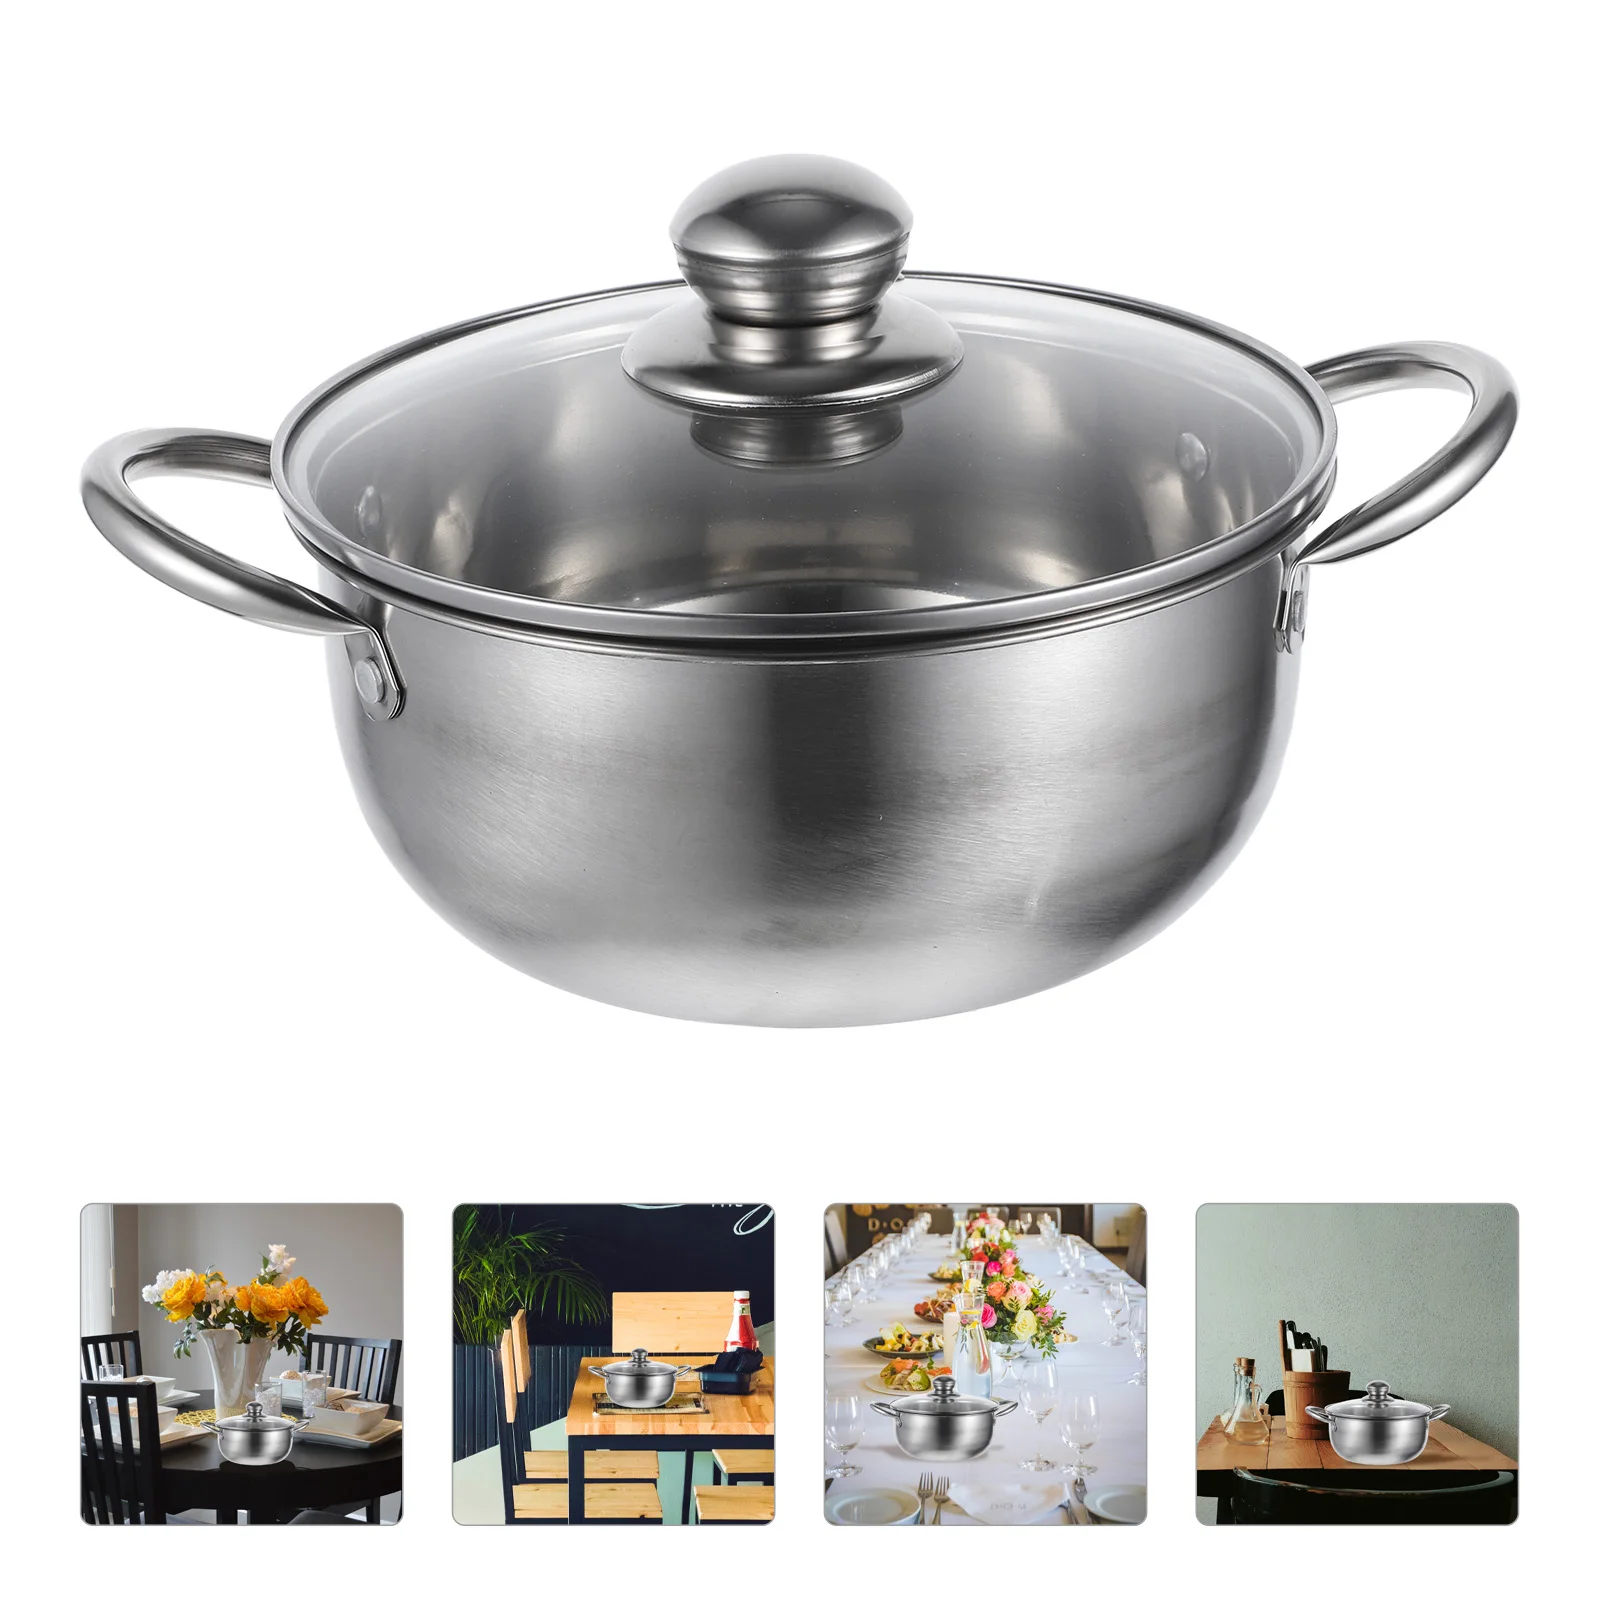 

Pot Steamer Stainless Steel Soup Cooking Cookware Steam Kitchen Cooker Vegetable Stock Food Stockpot Induction Seafood Pan Pots